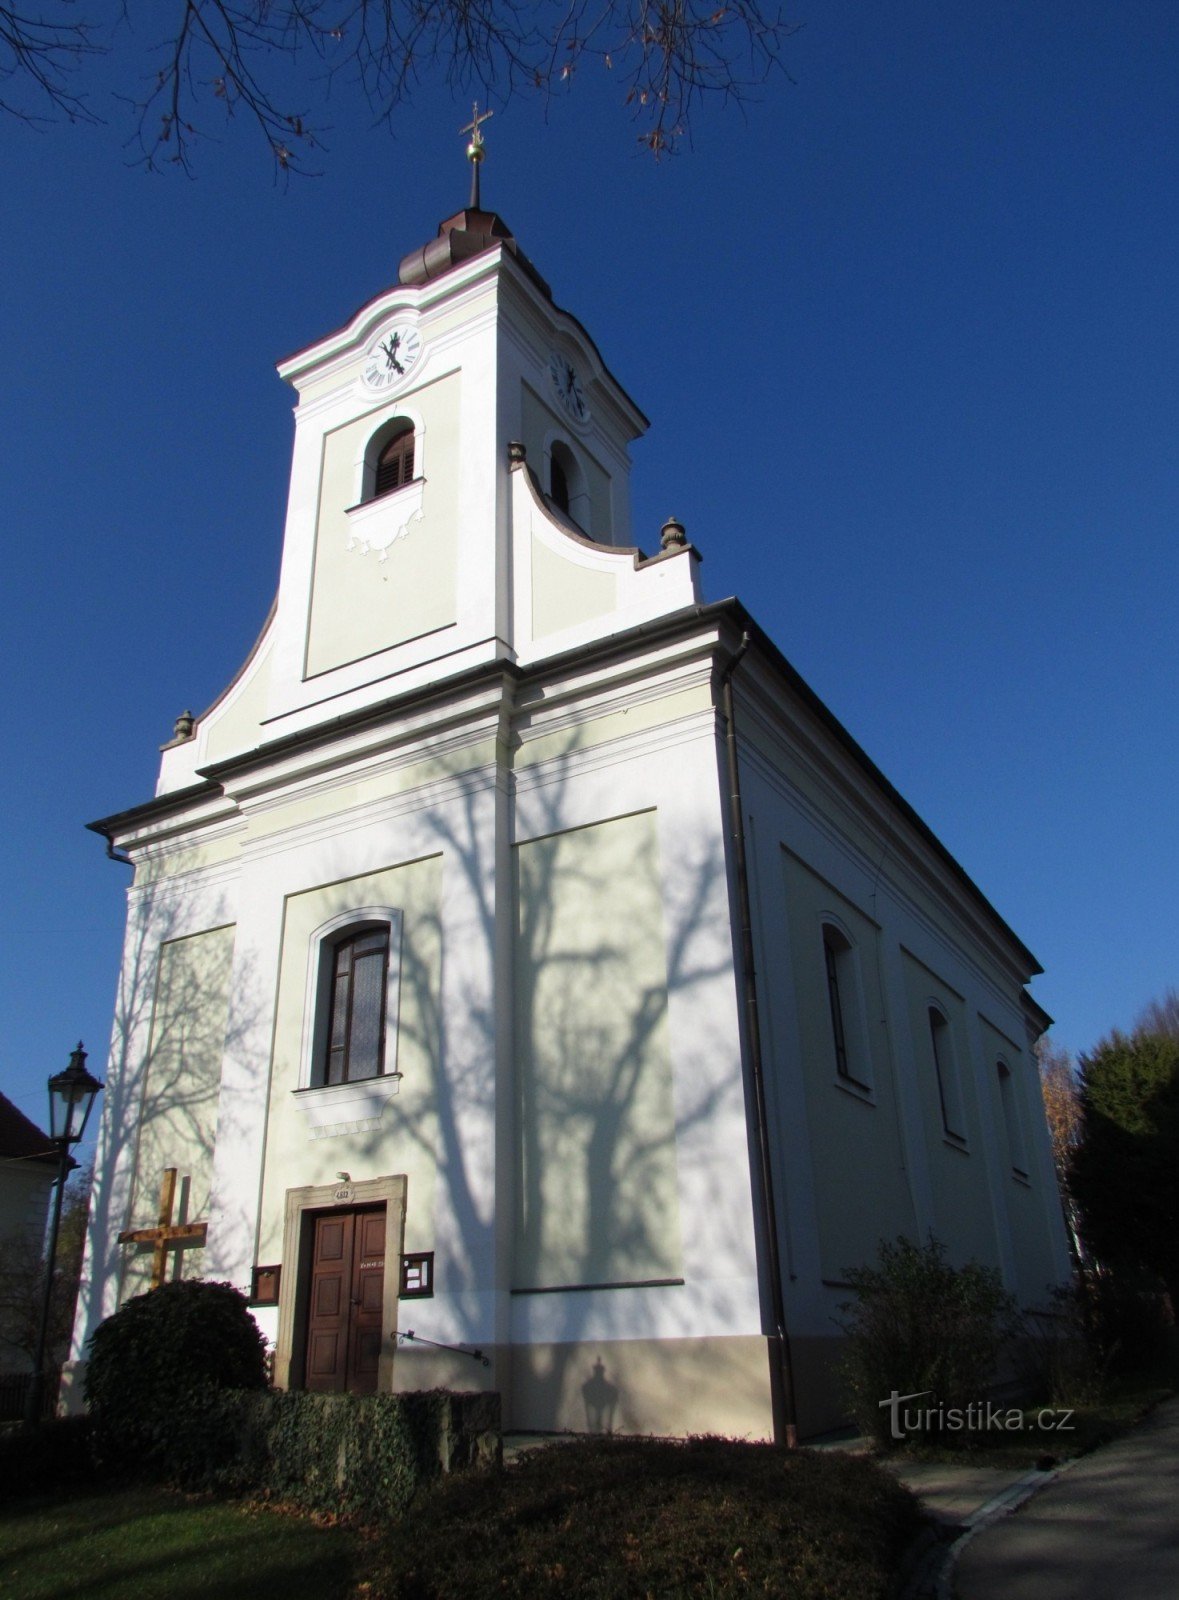 St. Joseph's Church and rectory in Lukov